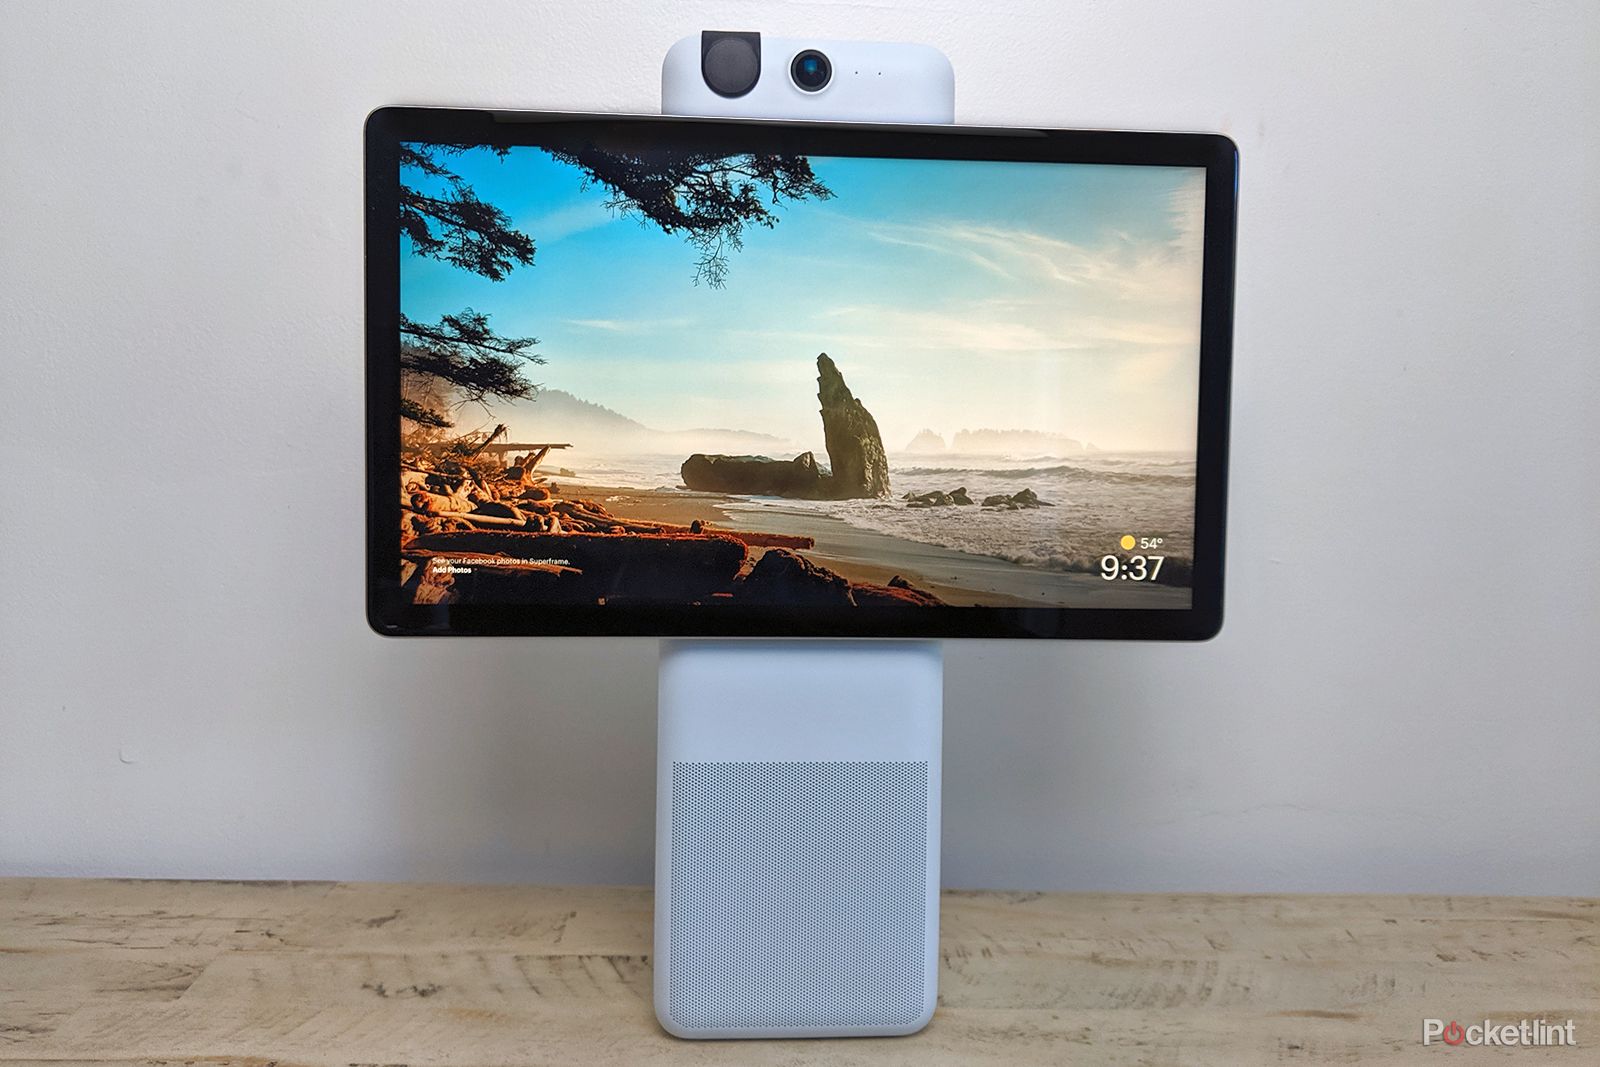 Which is the best Meta Portal video calling device for you?